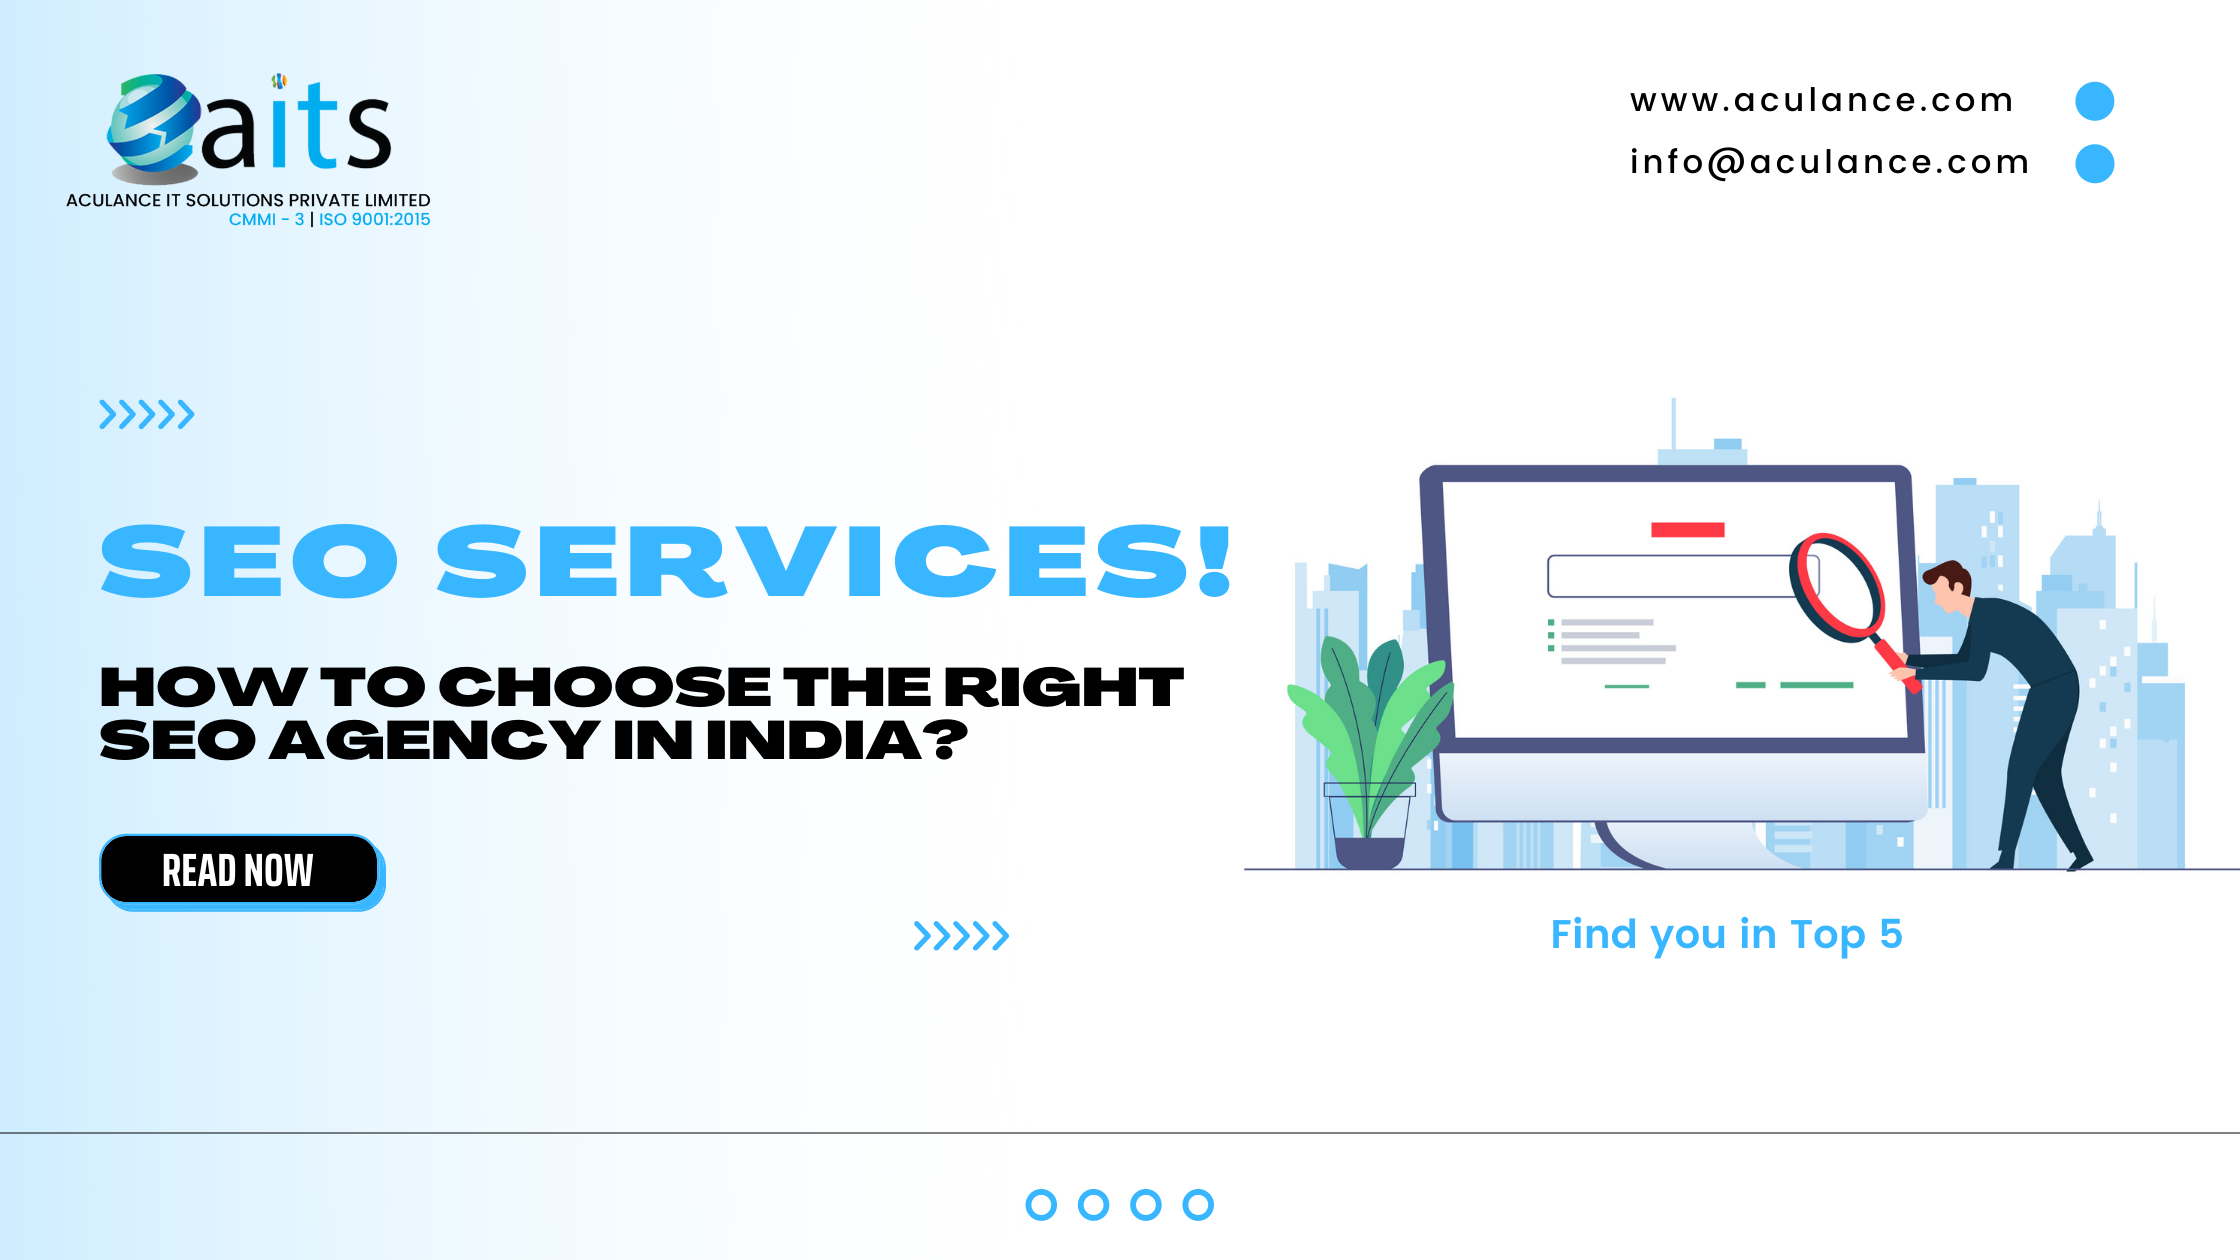 How to Choose the Right SEO Agency in India